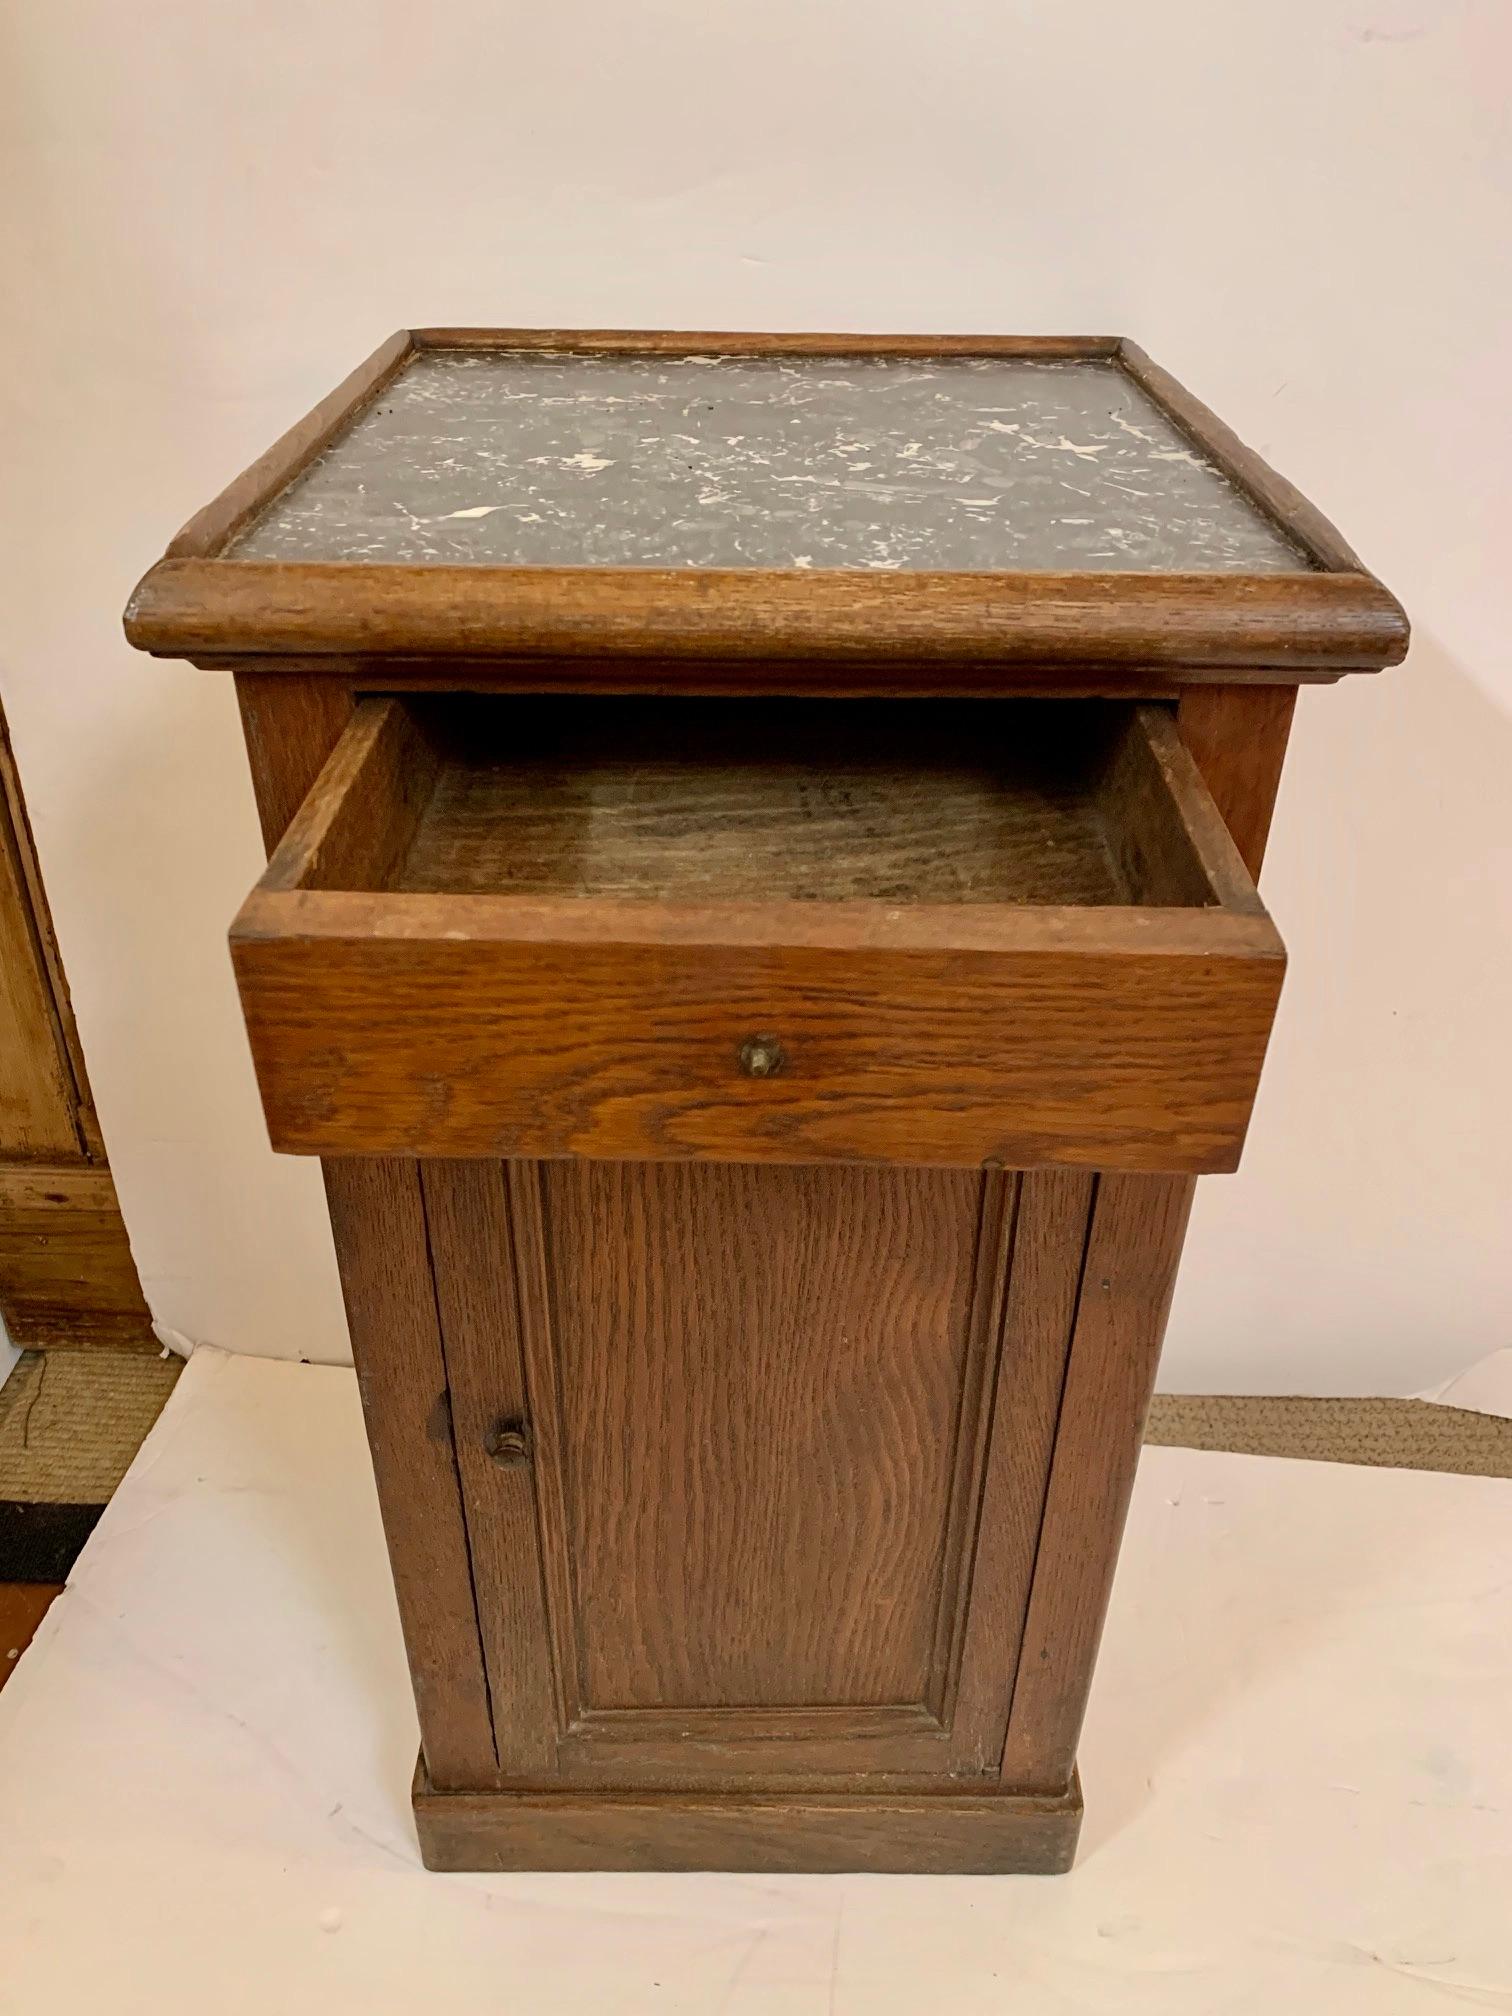 A handsome 19th century oak cabinet stand or side table having lively black and white marble top and one-drawer with storage inside.